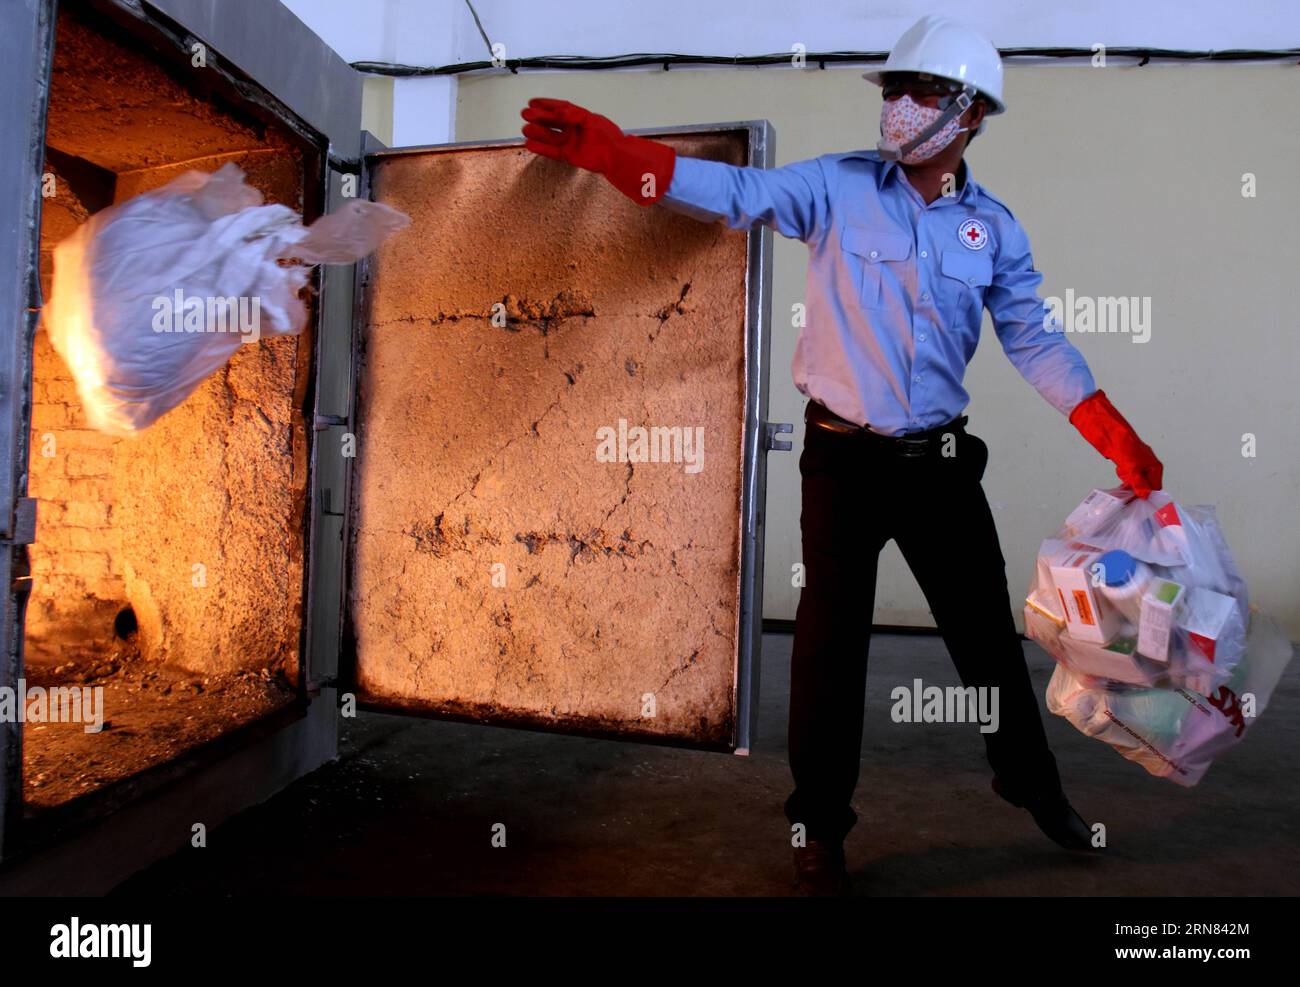 (151005) -- PHNOM PENH, Oct. 5, 2015 -- A Cambodian Red Cross worker throws bags of counterfeit medicines into a garbage incinerator in Phnom Penh, Cambodia, Oct. 5, 2015. Some 1,967 kg of fake medicines were burned down on Monday at a dumpsite on the southwestern outskirts of capital Phnom Penh, officials said. ) CAMBODIA-PHNOM PENH-COUNTERFEIT MEDICINE-BURNED Sovannara PUBLICATIONxNOTxINxCHN   Phnom Penh OCT 5 2015 a Cambodian Red Cross Worker throws Bags of counterfeit Medicines into a Garbage incinerator in Phnom Penh Cambodia OCT 5 2015 Some 1 967 KG of Fake Medicines Were burned Down ON Stock Photo